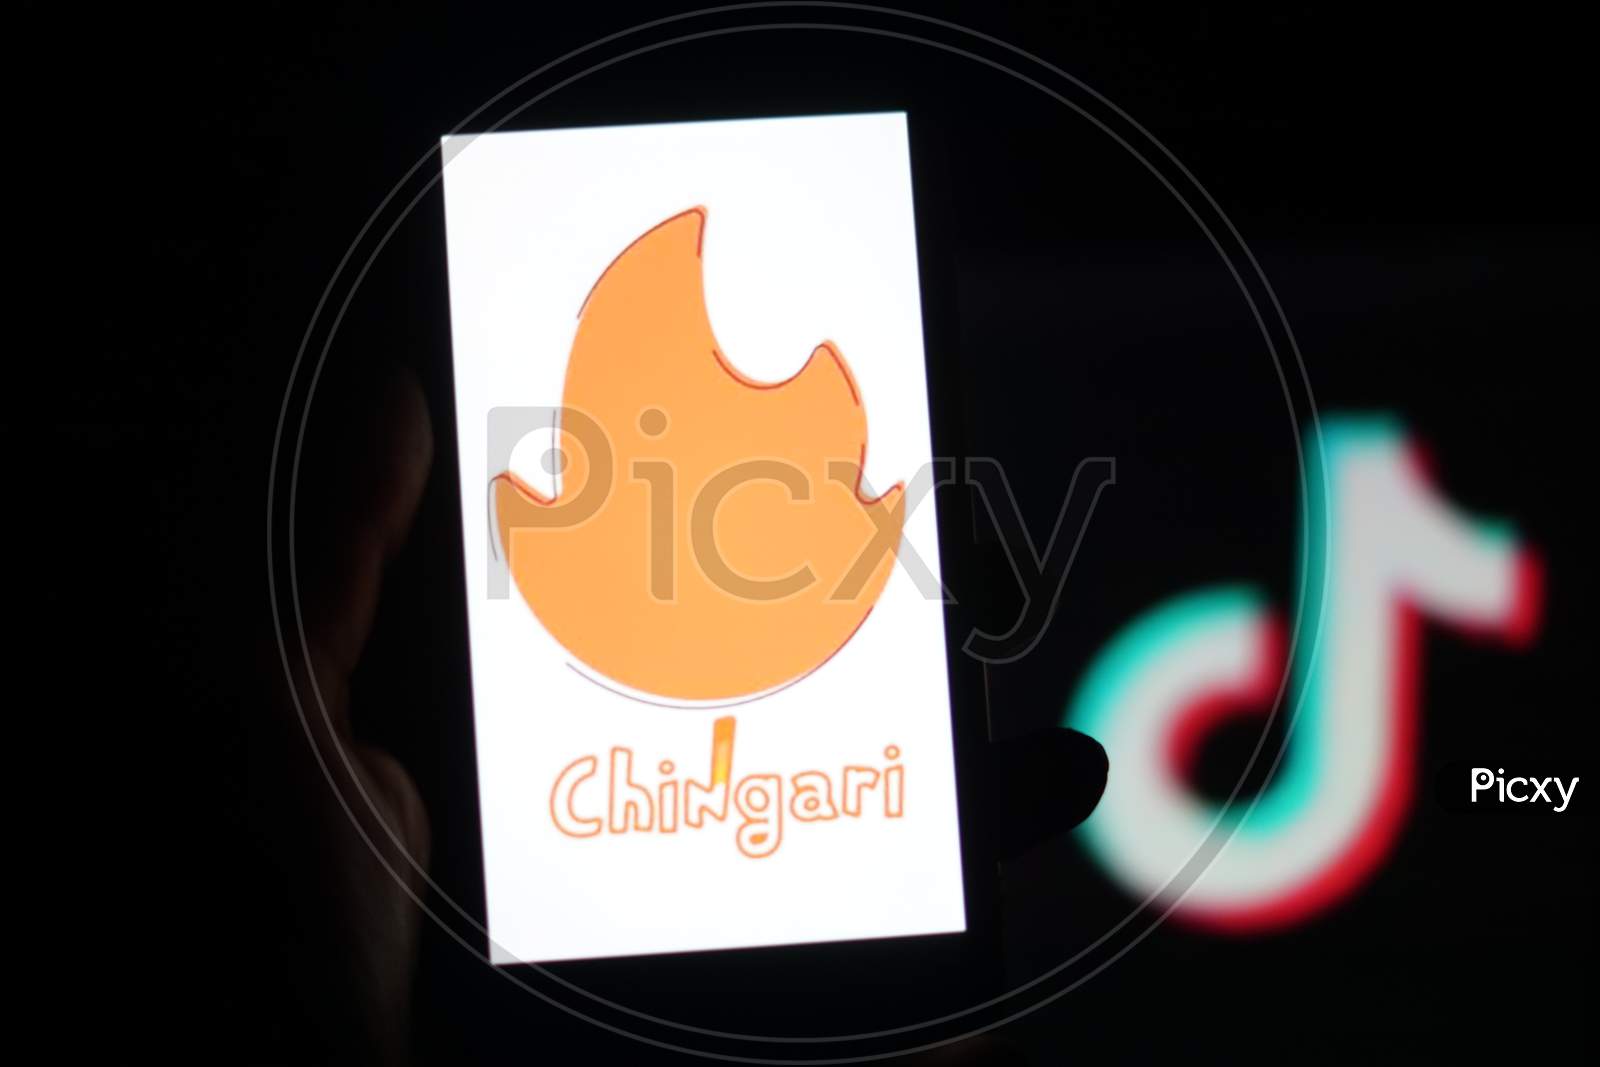 Chingari App logo on Mobile screen with Banned Tiktok Application Logo in the background